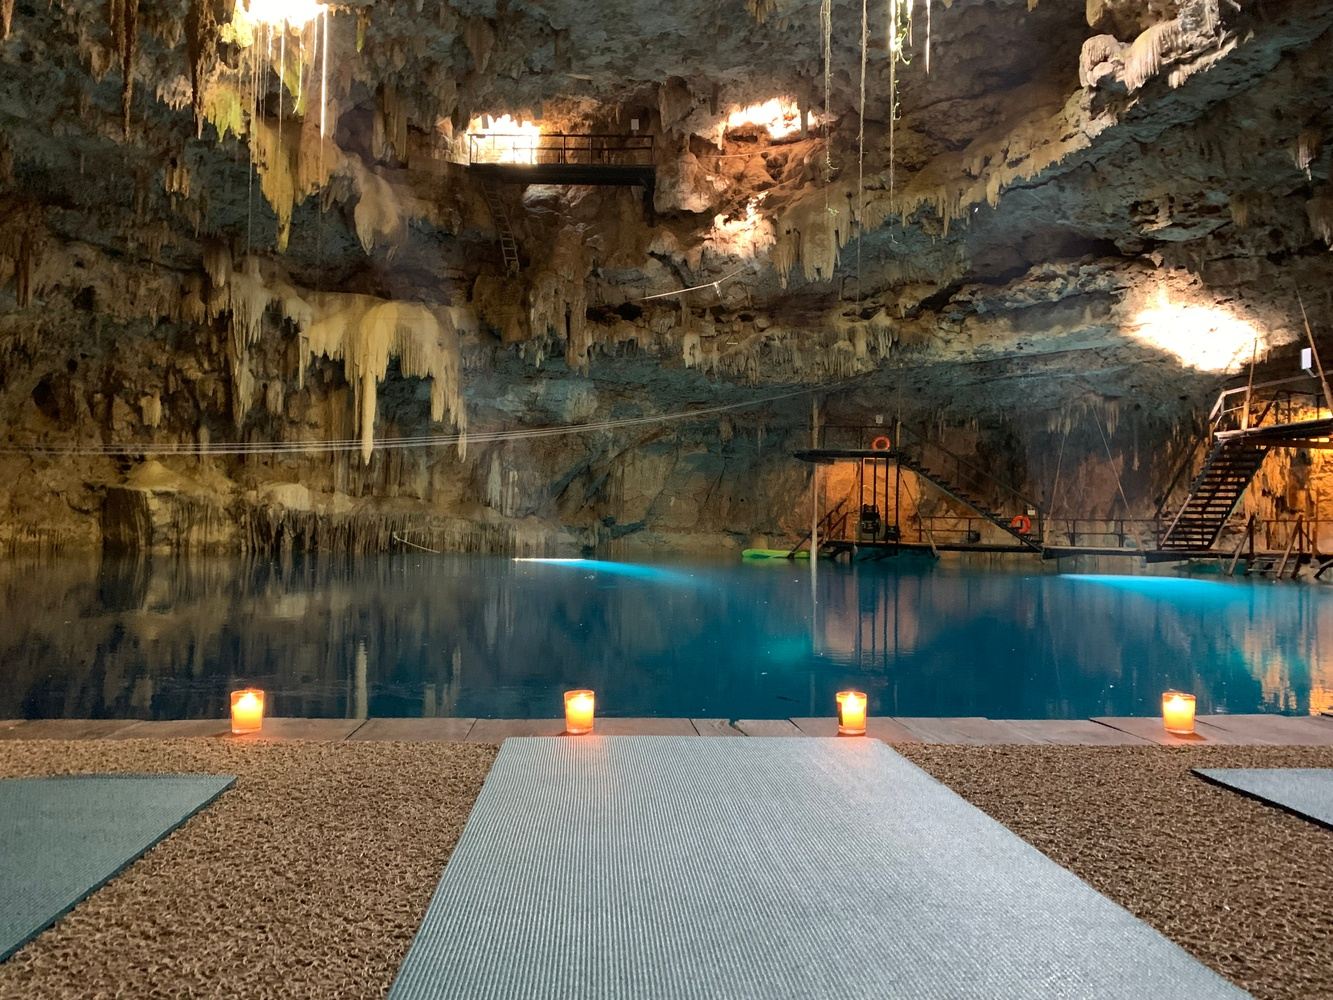 5 days of yoga in Tulum Caribbean beach discovering the Mayan Cenotes